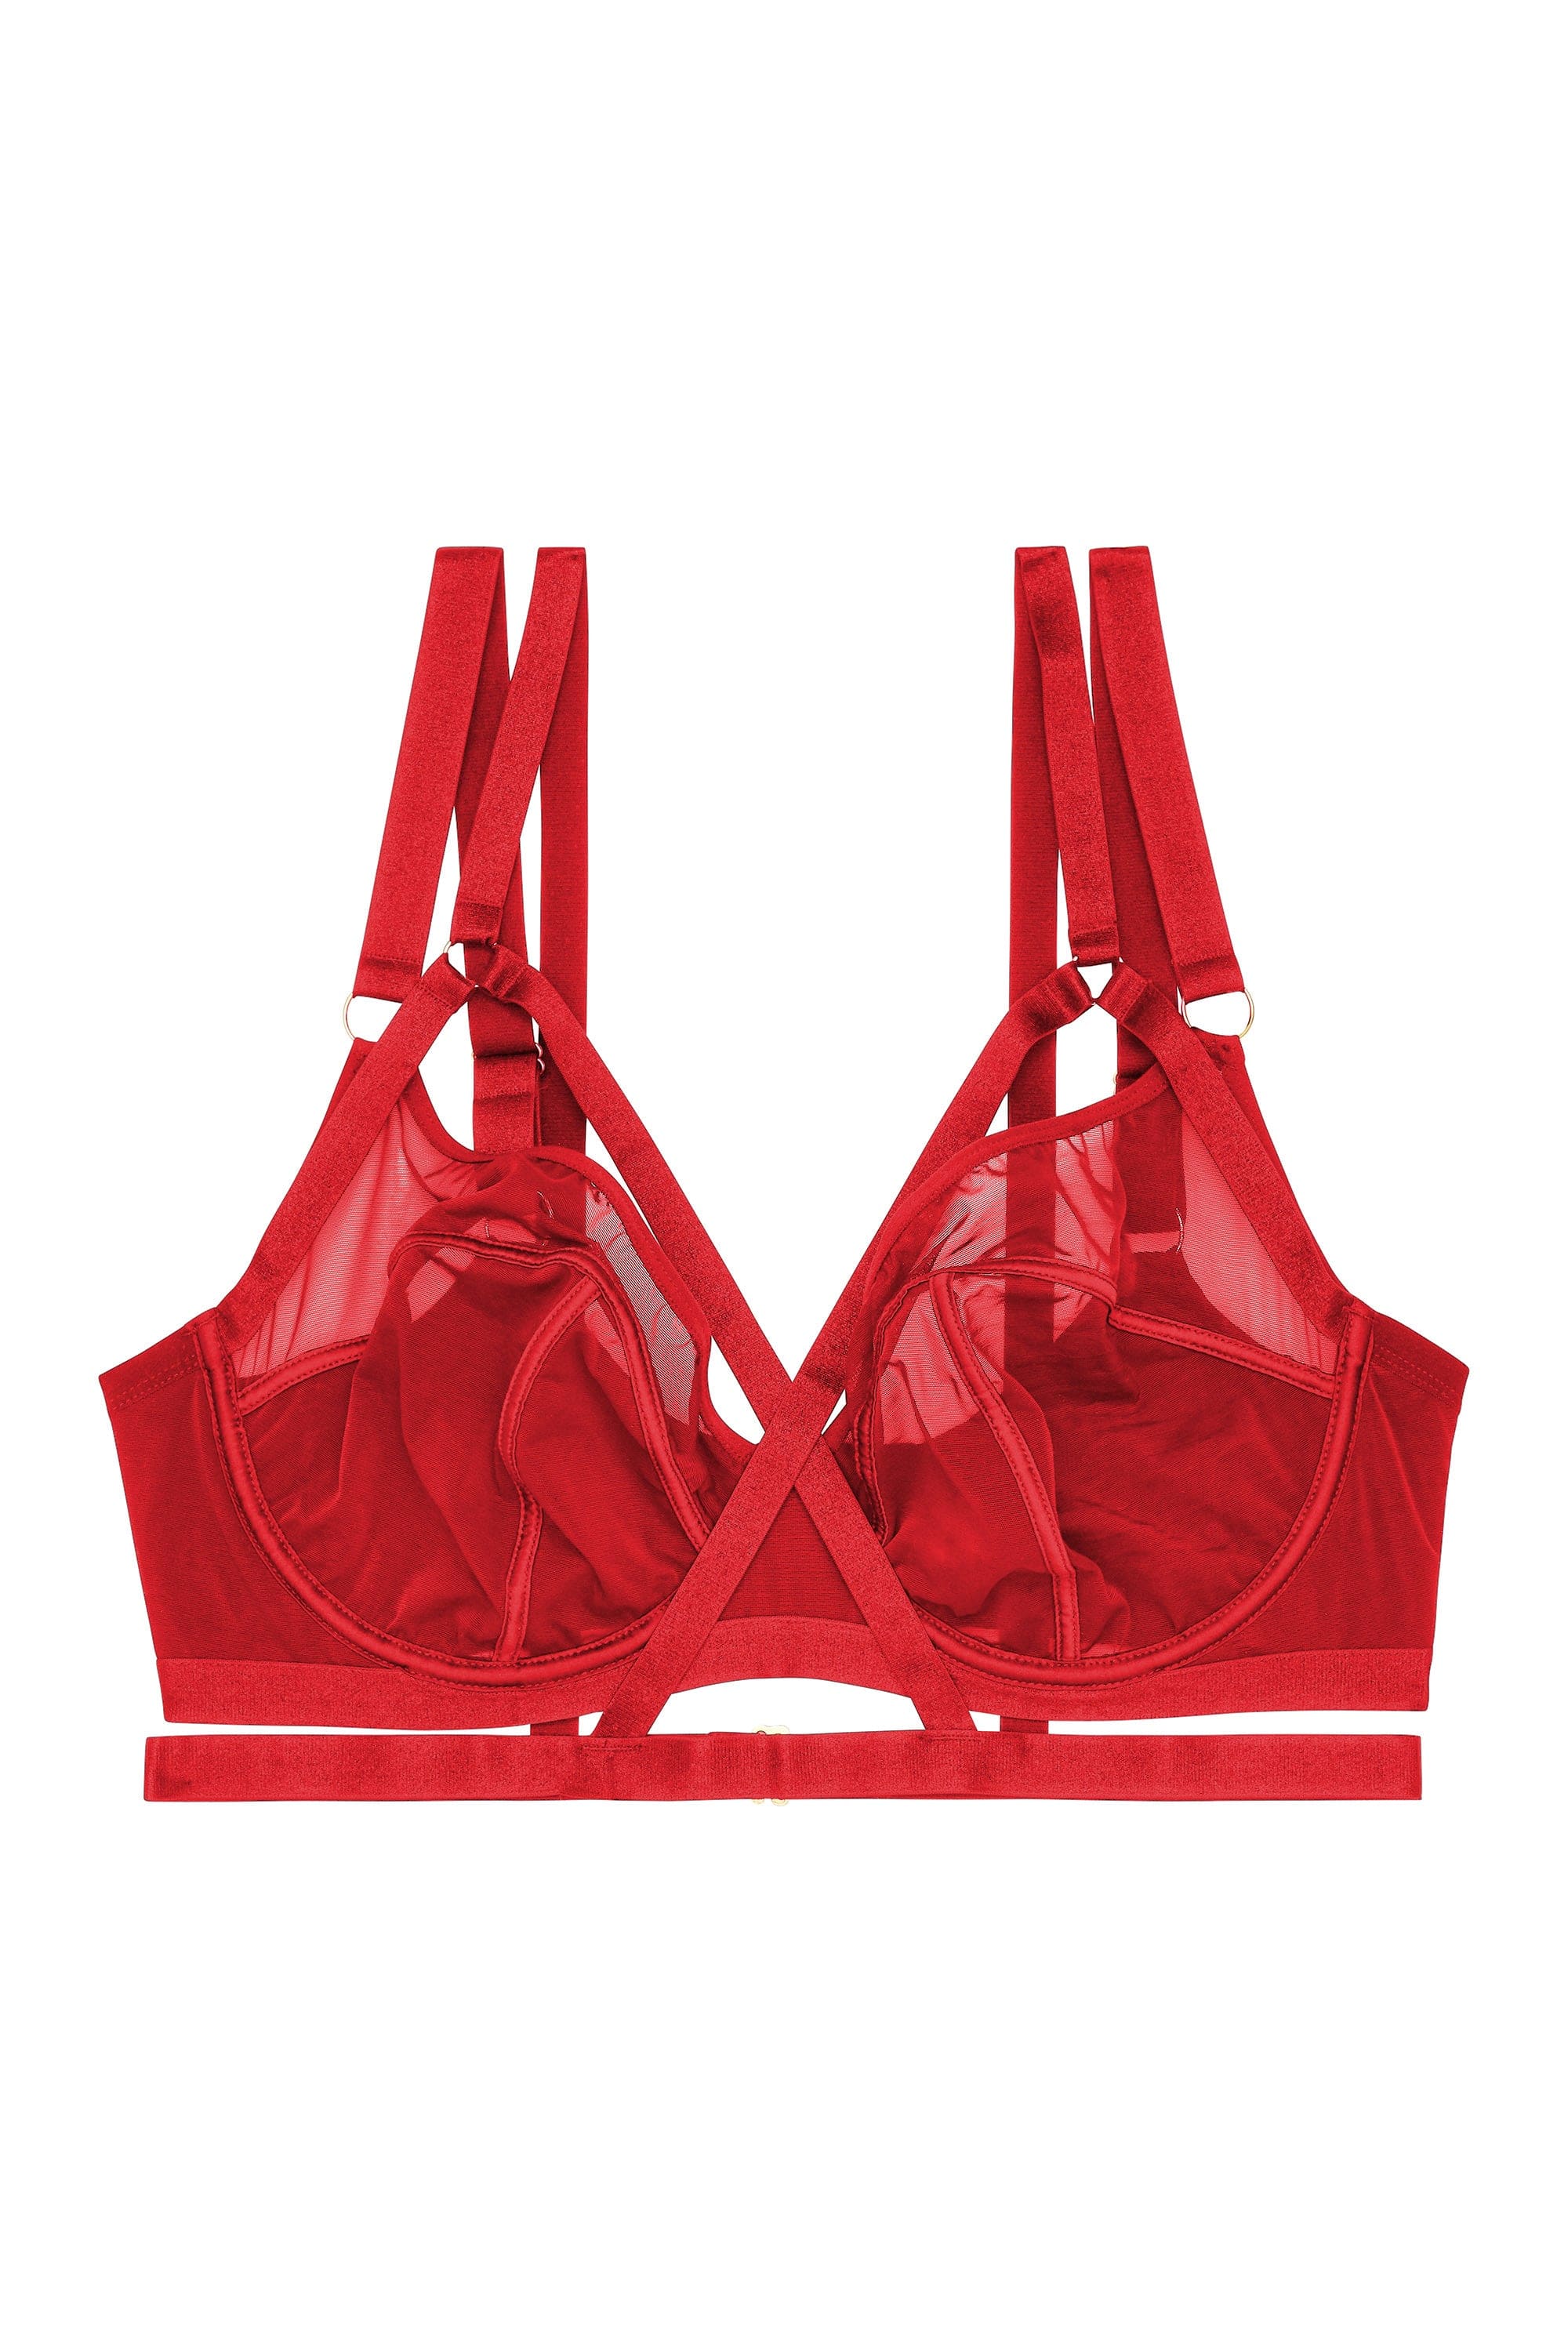 Cropped Harness Web Bralette in Vamp Red (FINAL SALE)– Bewitched